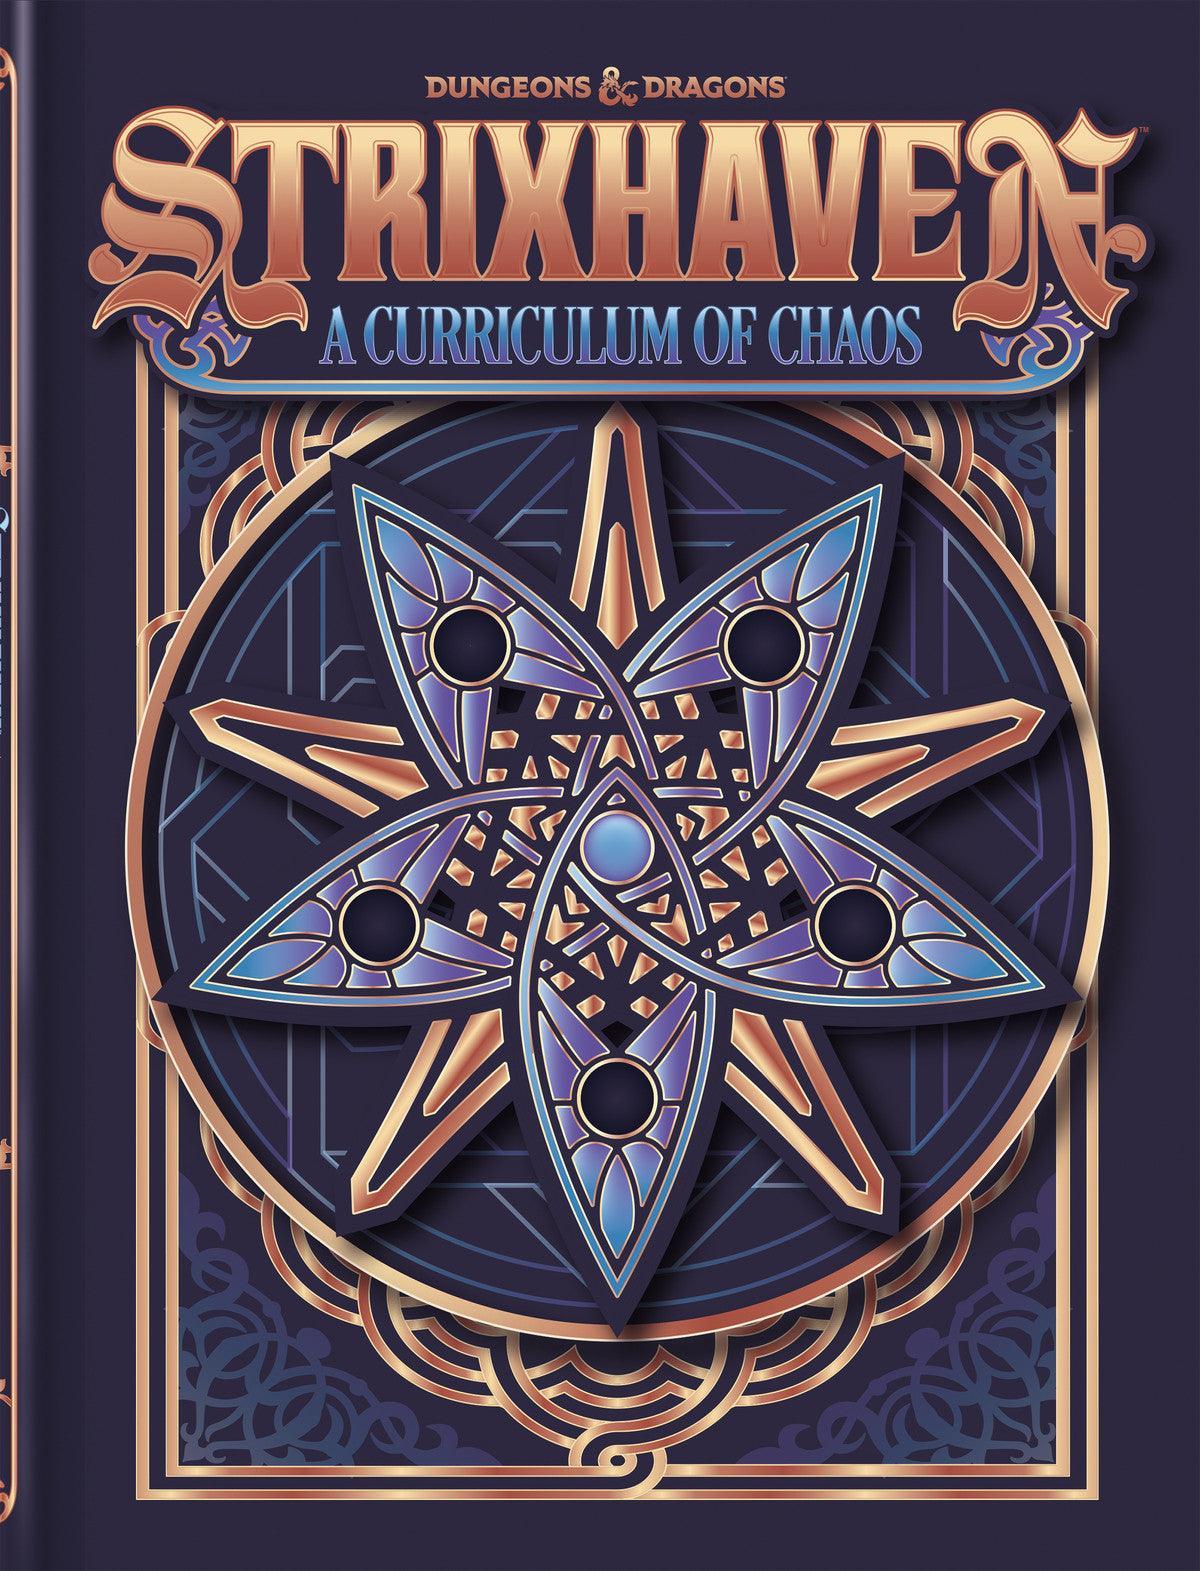 VR-93263 D&D Dungeons & Dragons Strixhaven A Curriculum of Chaos Hardcover Alternative Cover - Wizards of the Coast - Titan Pop Culture